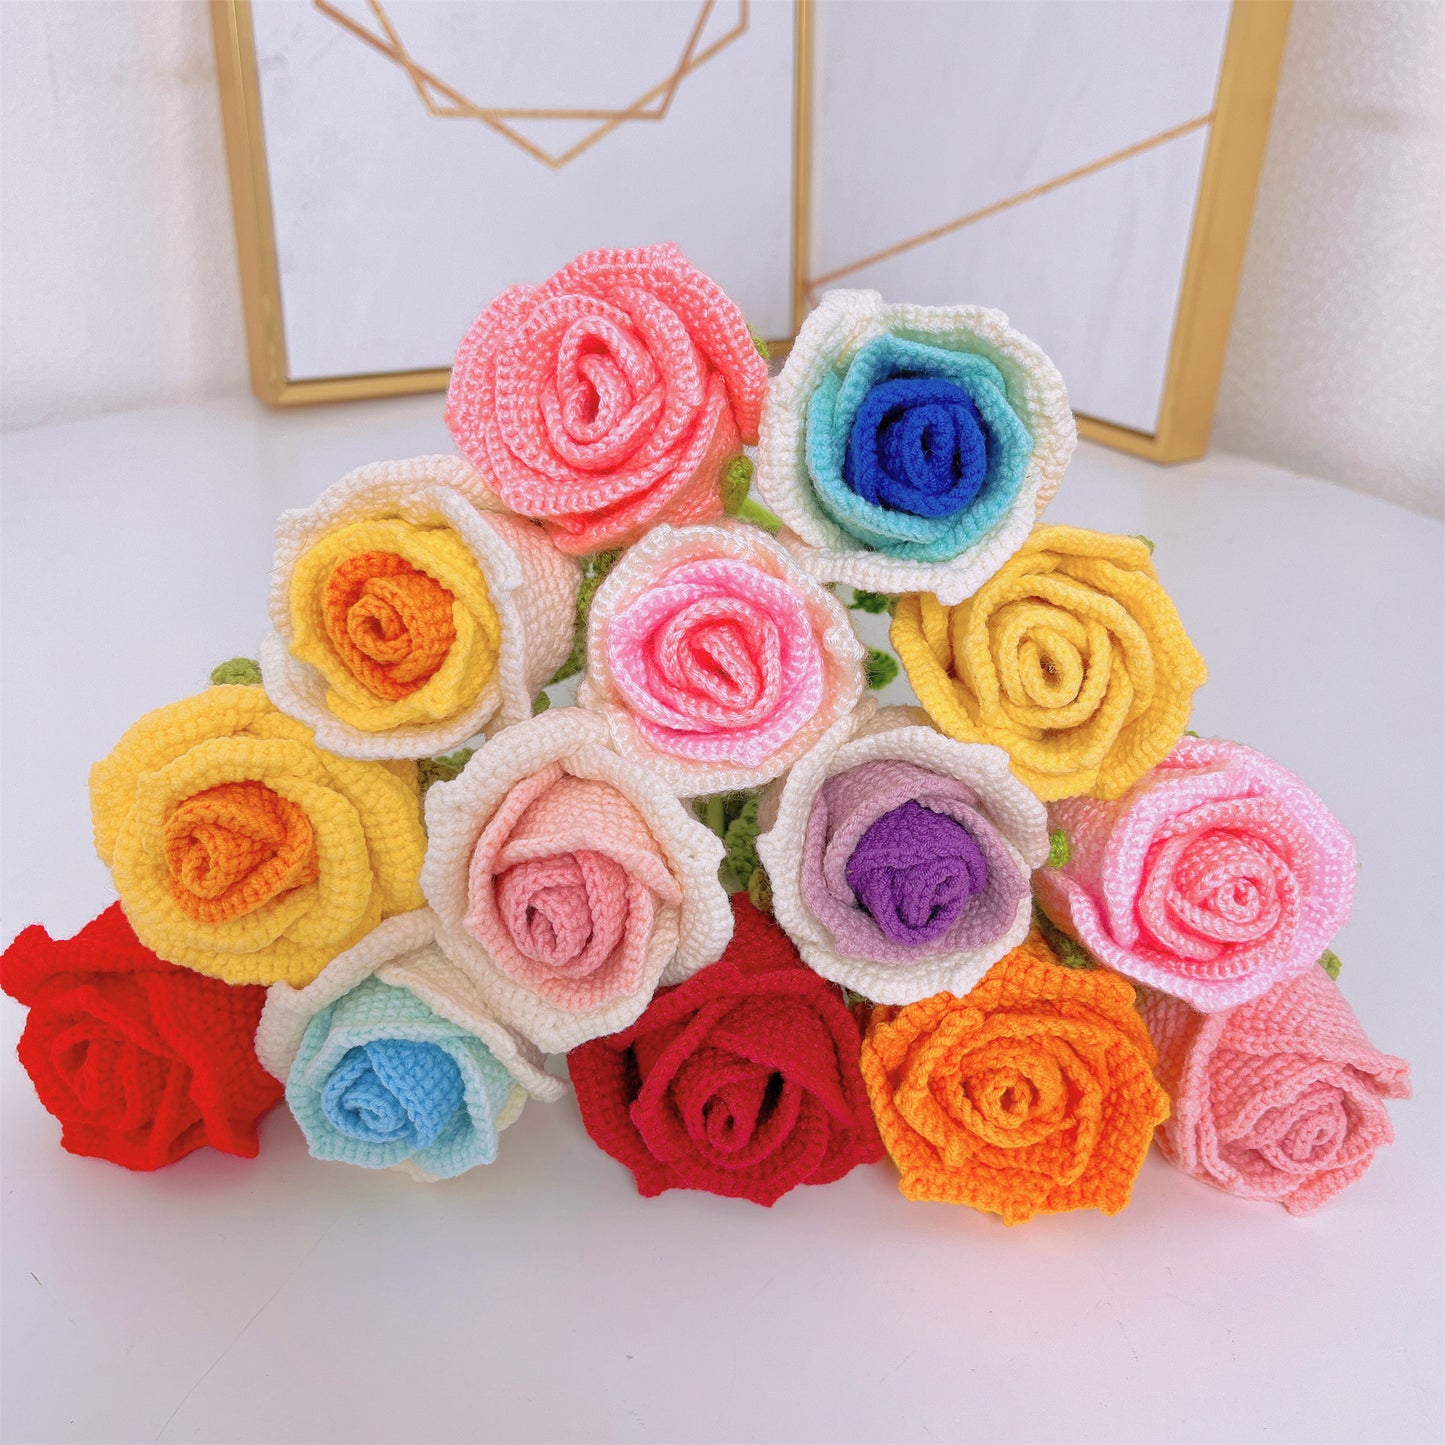 Handmade Crochet Cup Shape Roses - Yarn Crafted, Home Decor, Gift Idea, Unique and Elegant, Symbolic Flower, Fathers Day Gifts from Daughter